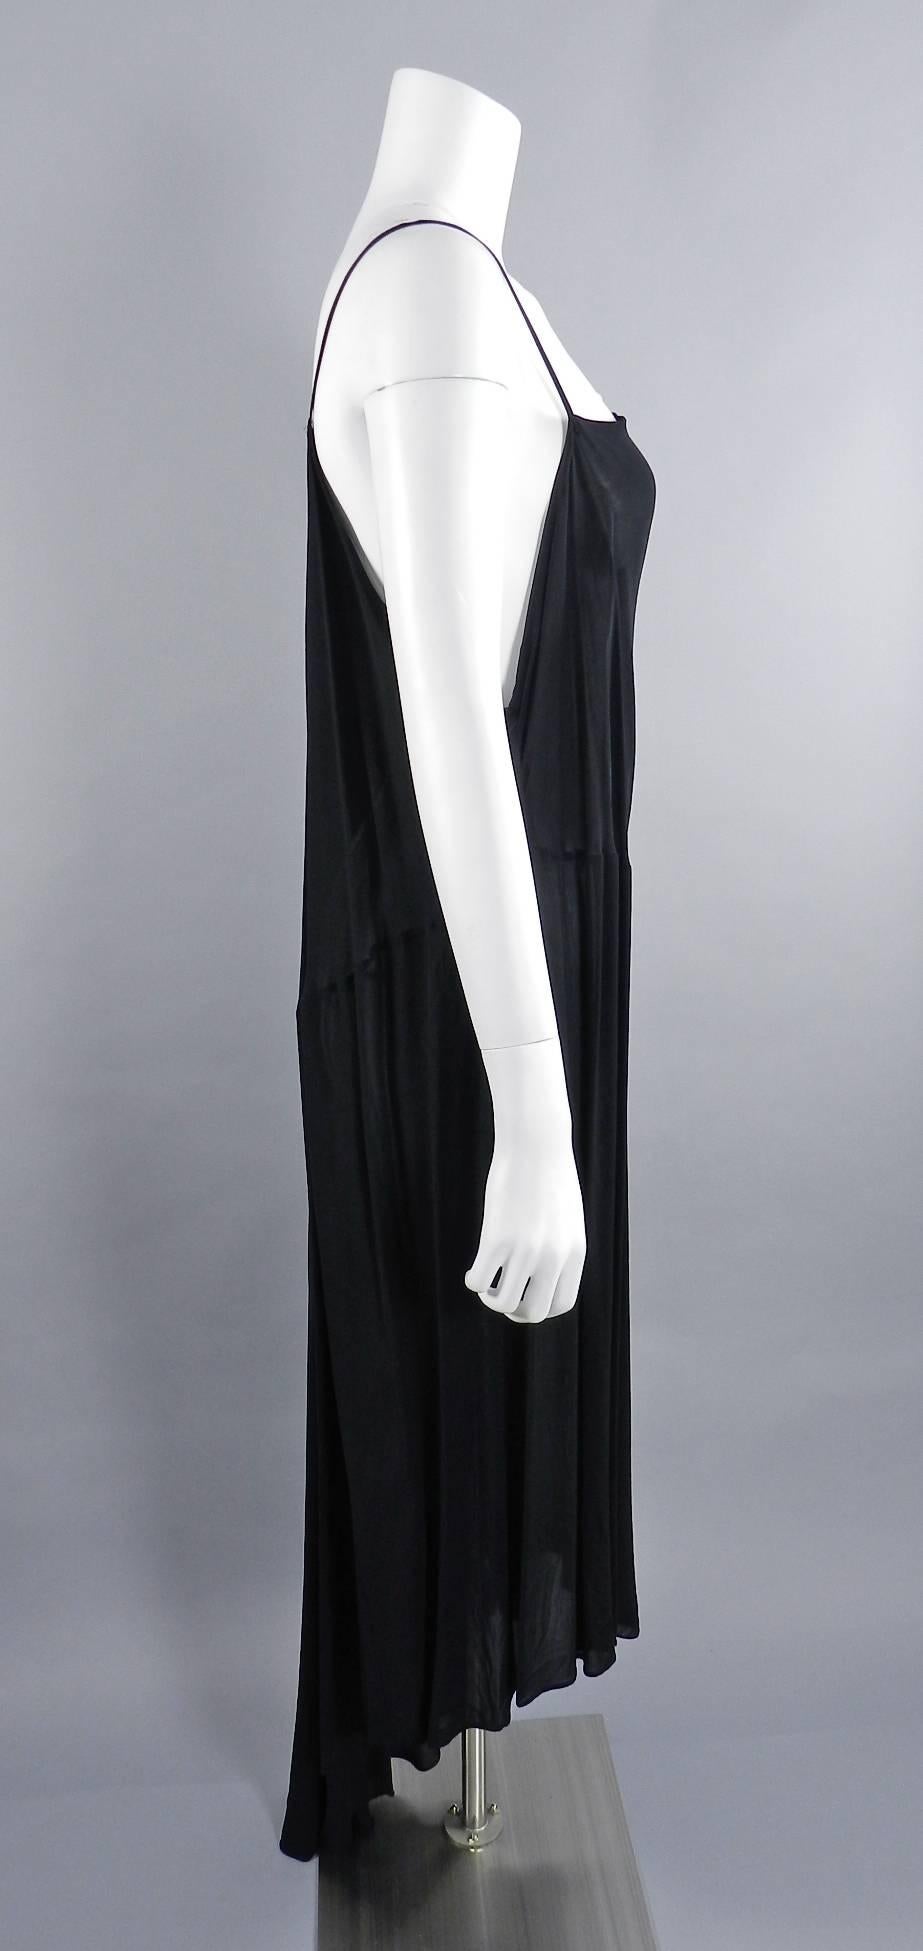 Yohji Yamamoto vintage circa late 1980’s sheer black long dress. 100% rayon.  Loose and free pull-over design with no zippers or fasteners.  Asymmetrical hemline, one strappy shoulder, and one low plunging side. Shoulder to hem of longest part of